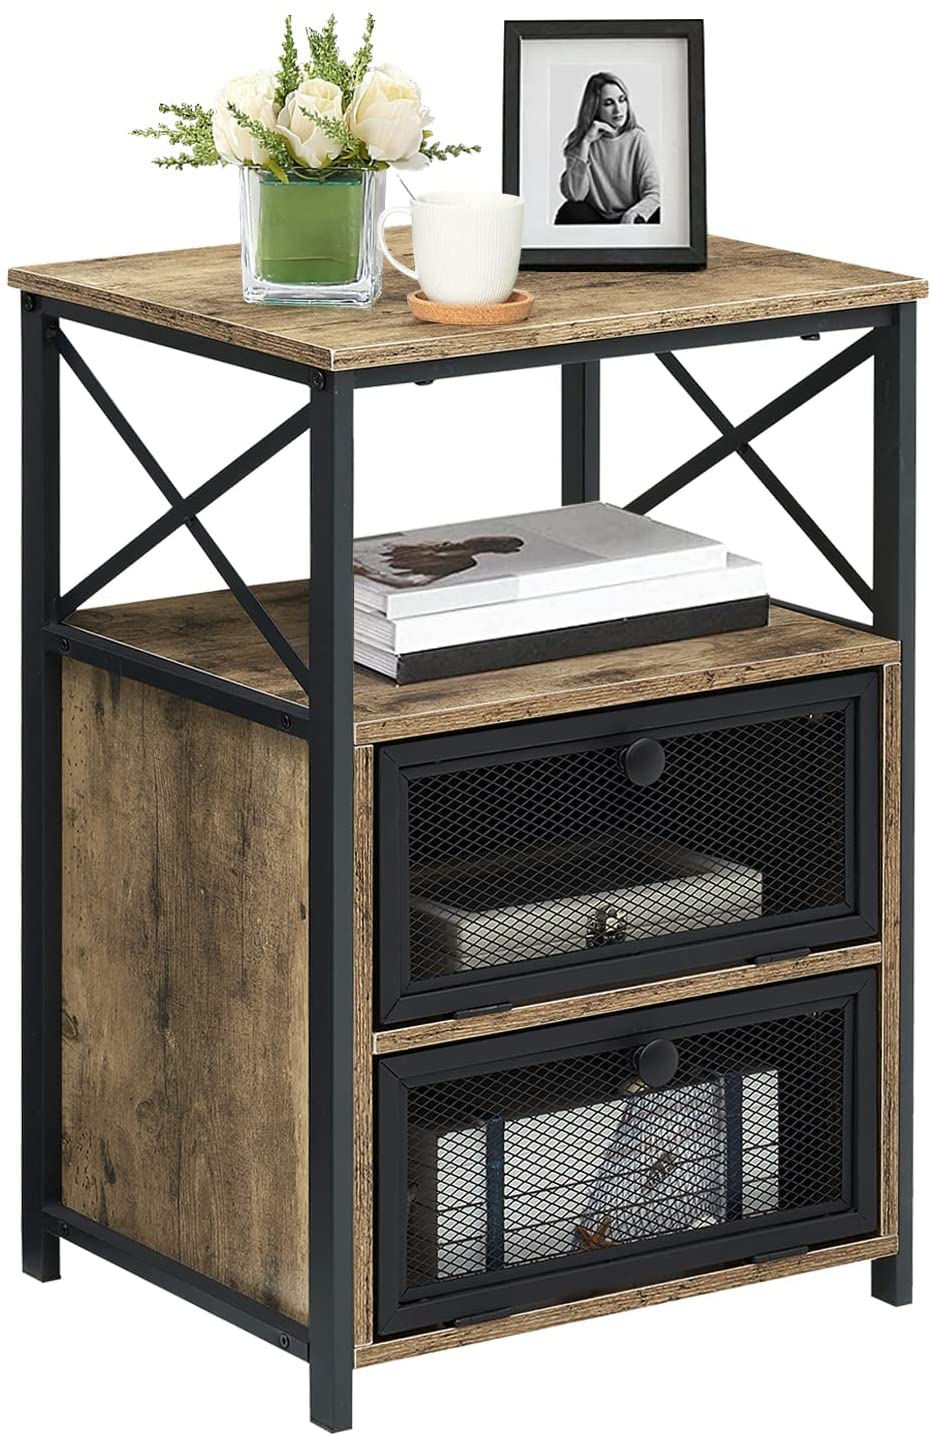 wood end table with big storage space